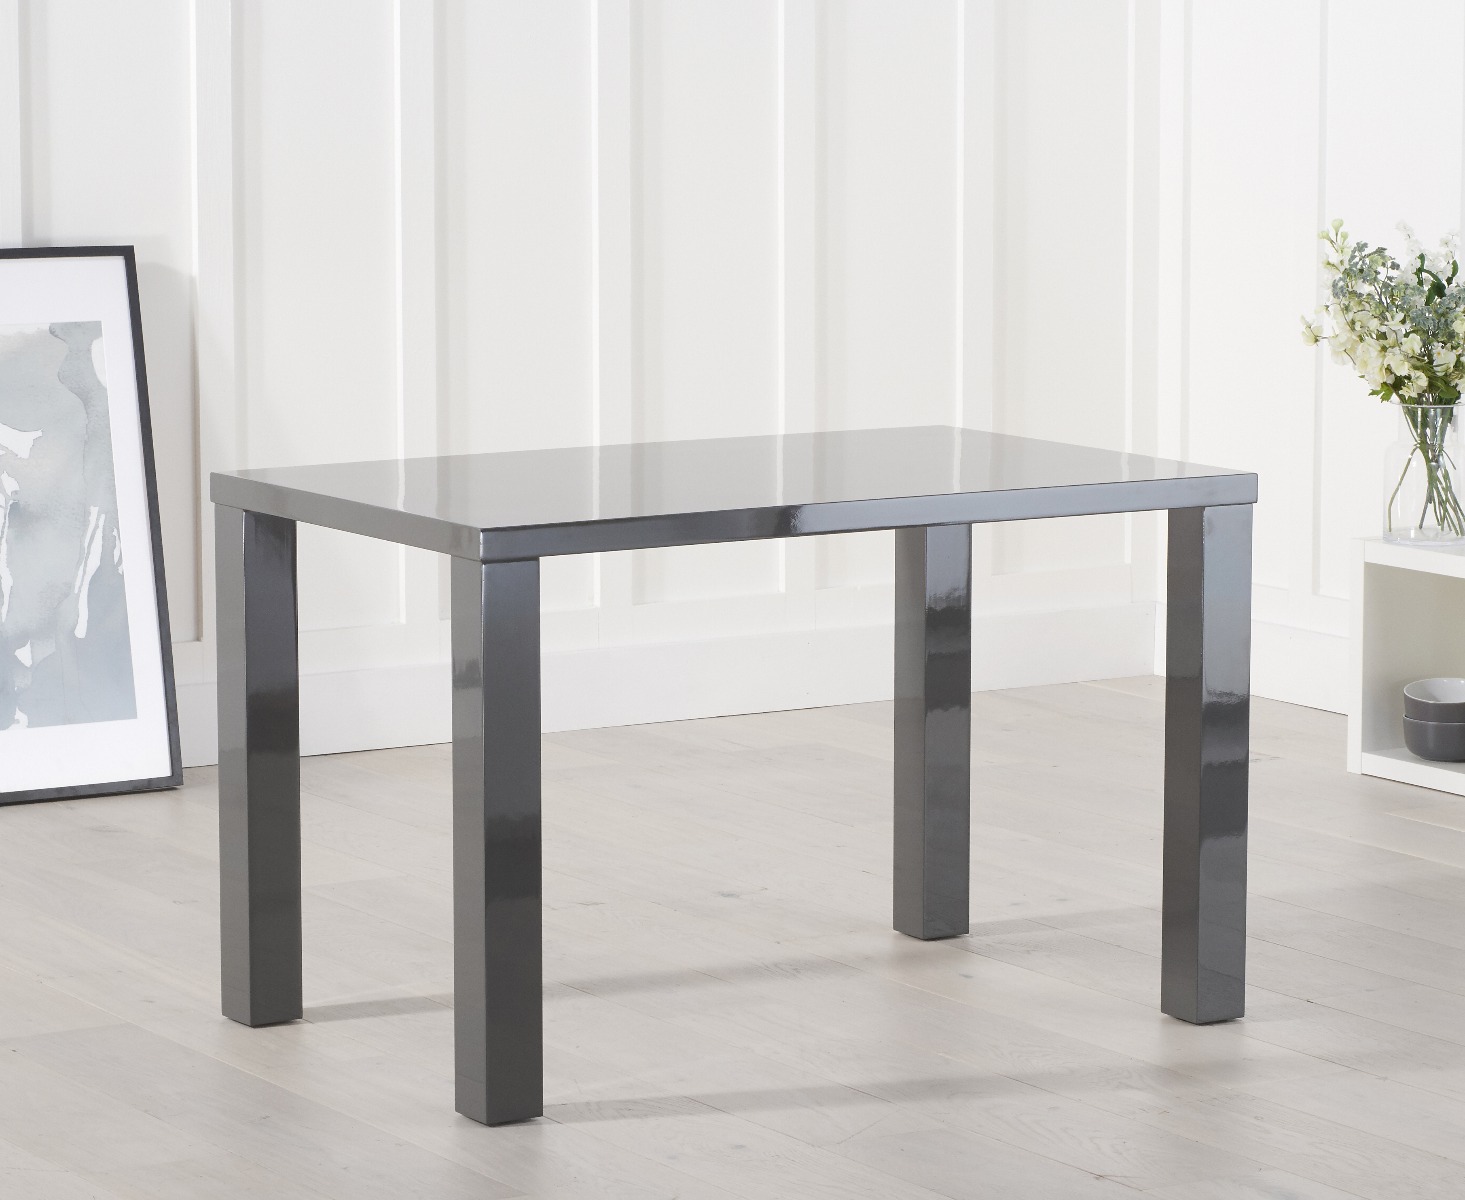 Photo 5 of Atlanta 120cm dark grey high gloss dining table with 4 grey gianni chairs